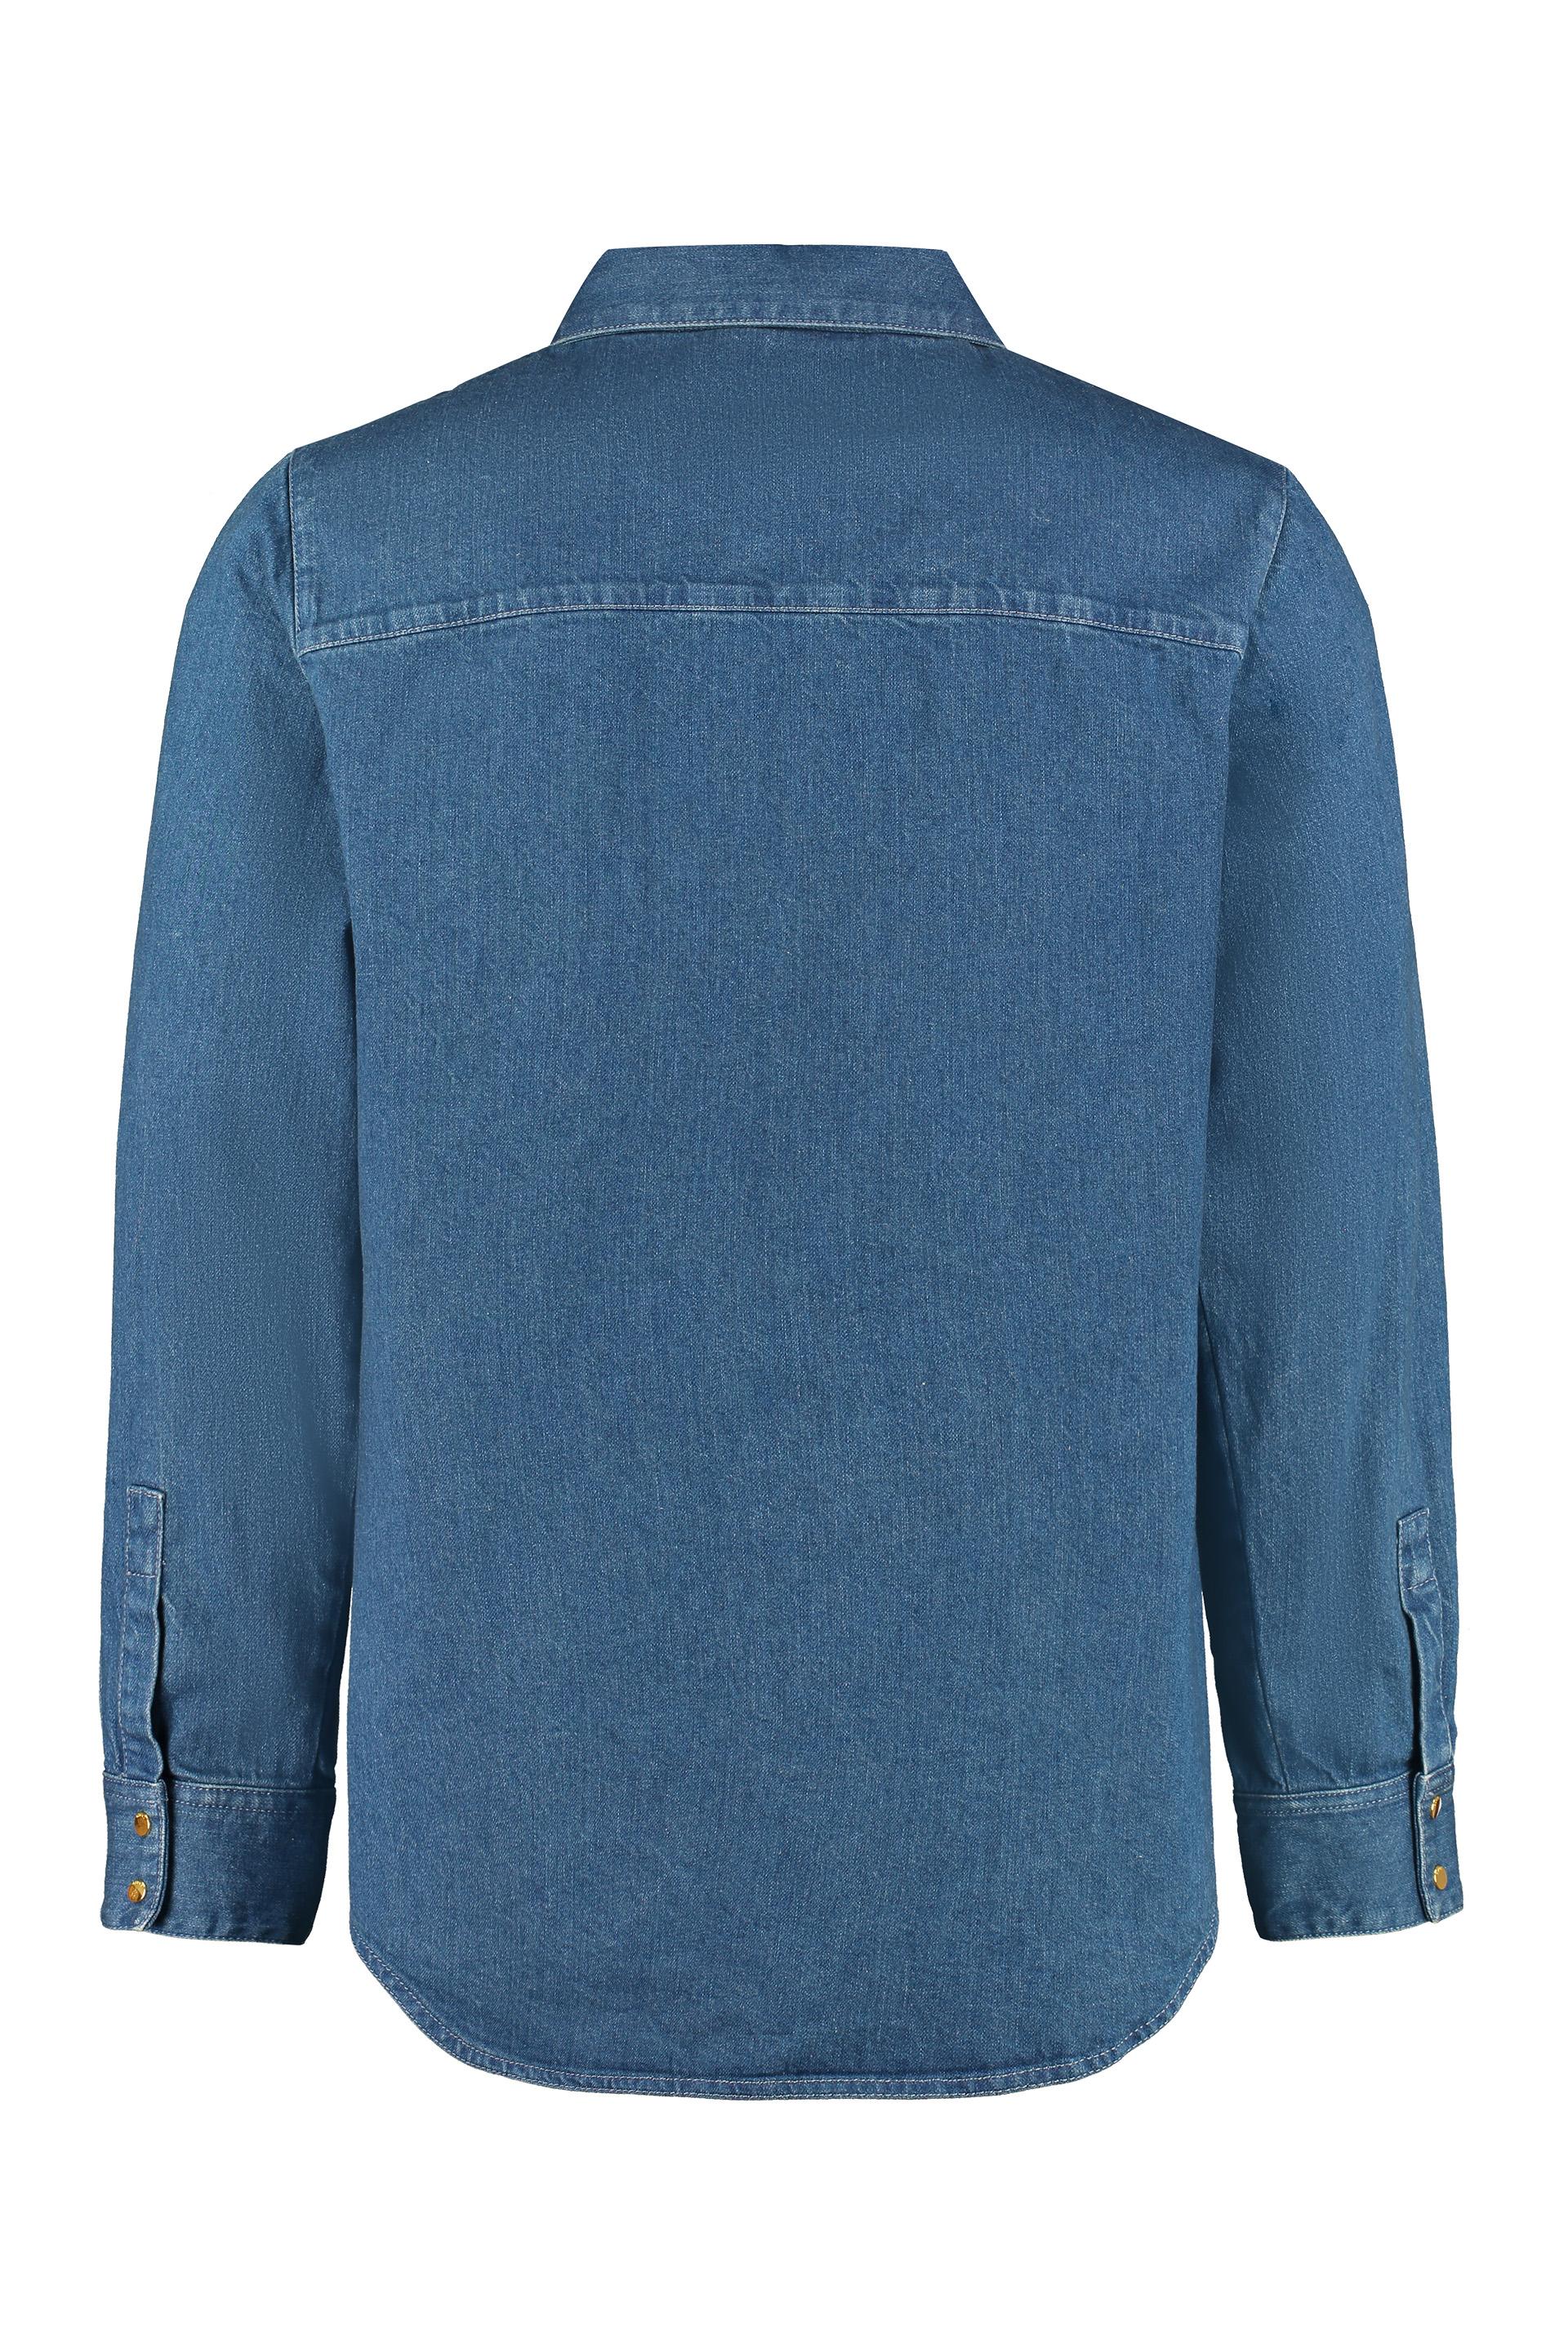 Gucci Stone Washed Denim Shirt in Blue for Men - Lyst